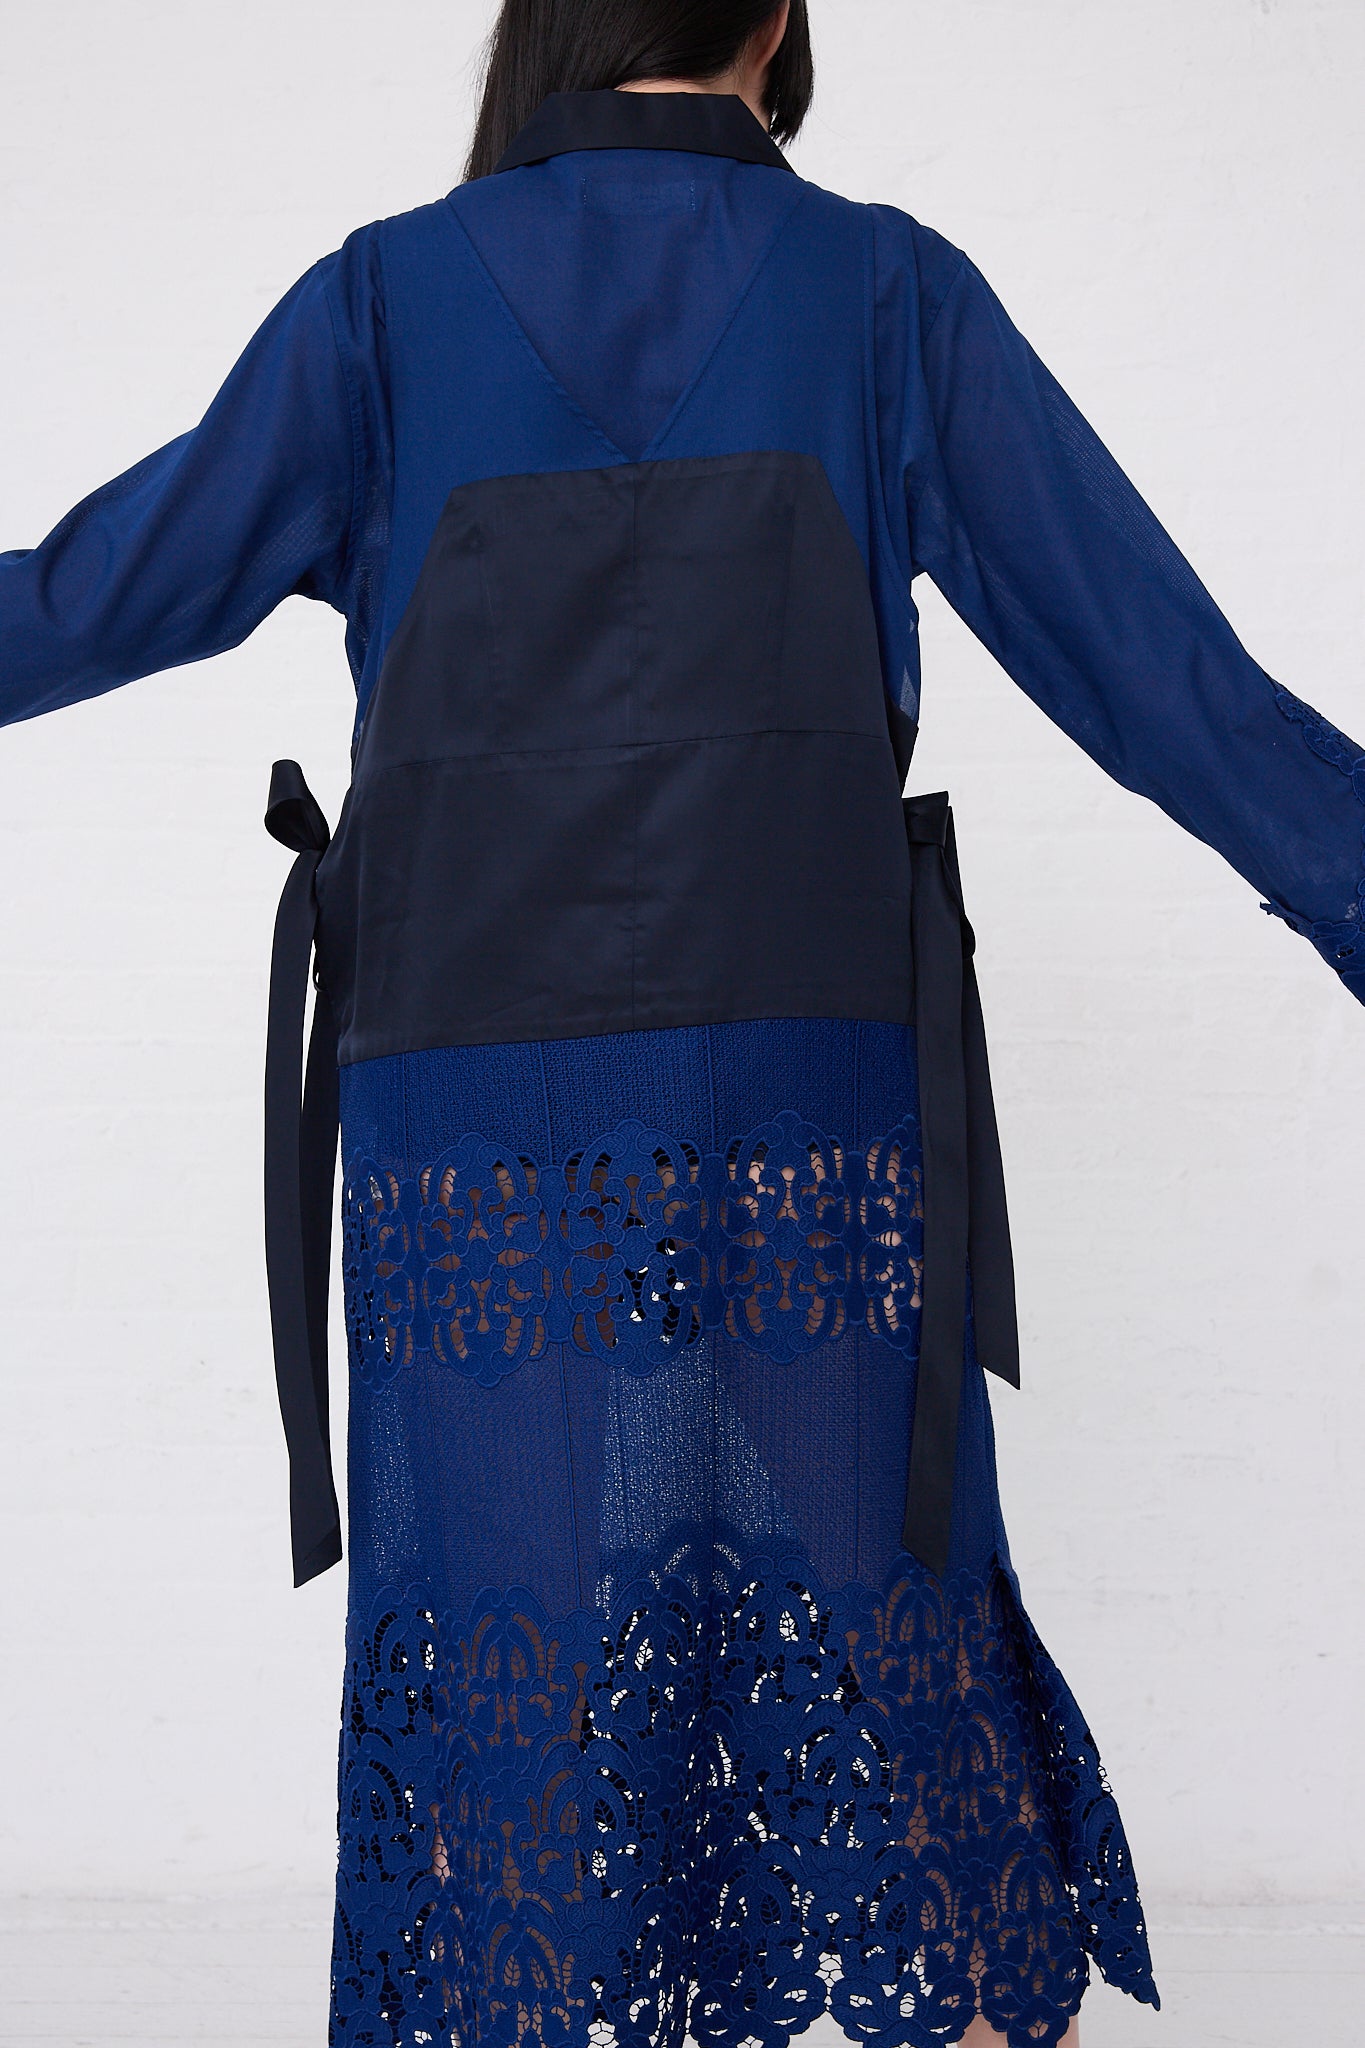 The back view of a woman wearing a TOGA PULLA Mesh Lace Dress in Blue.